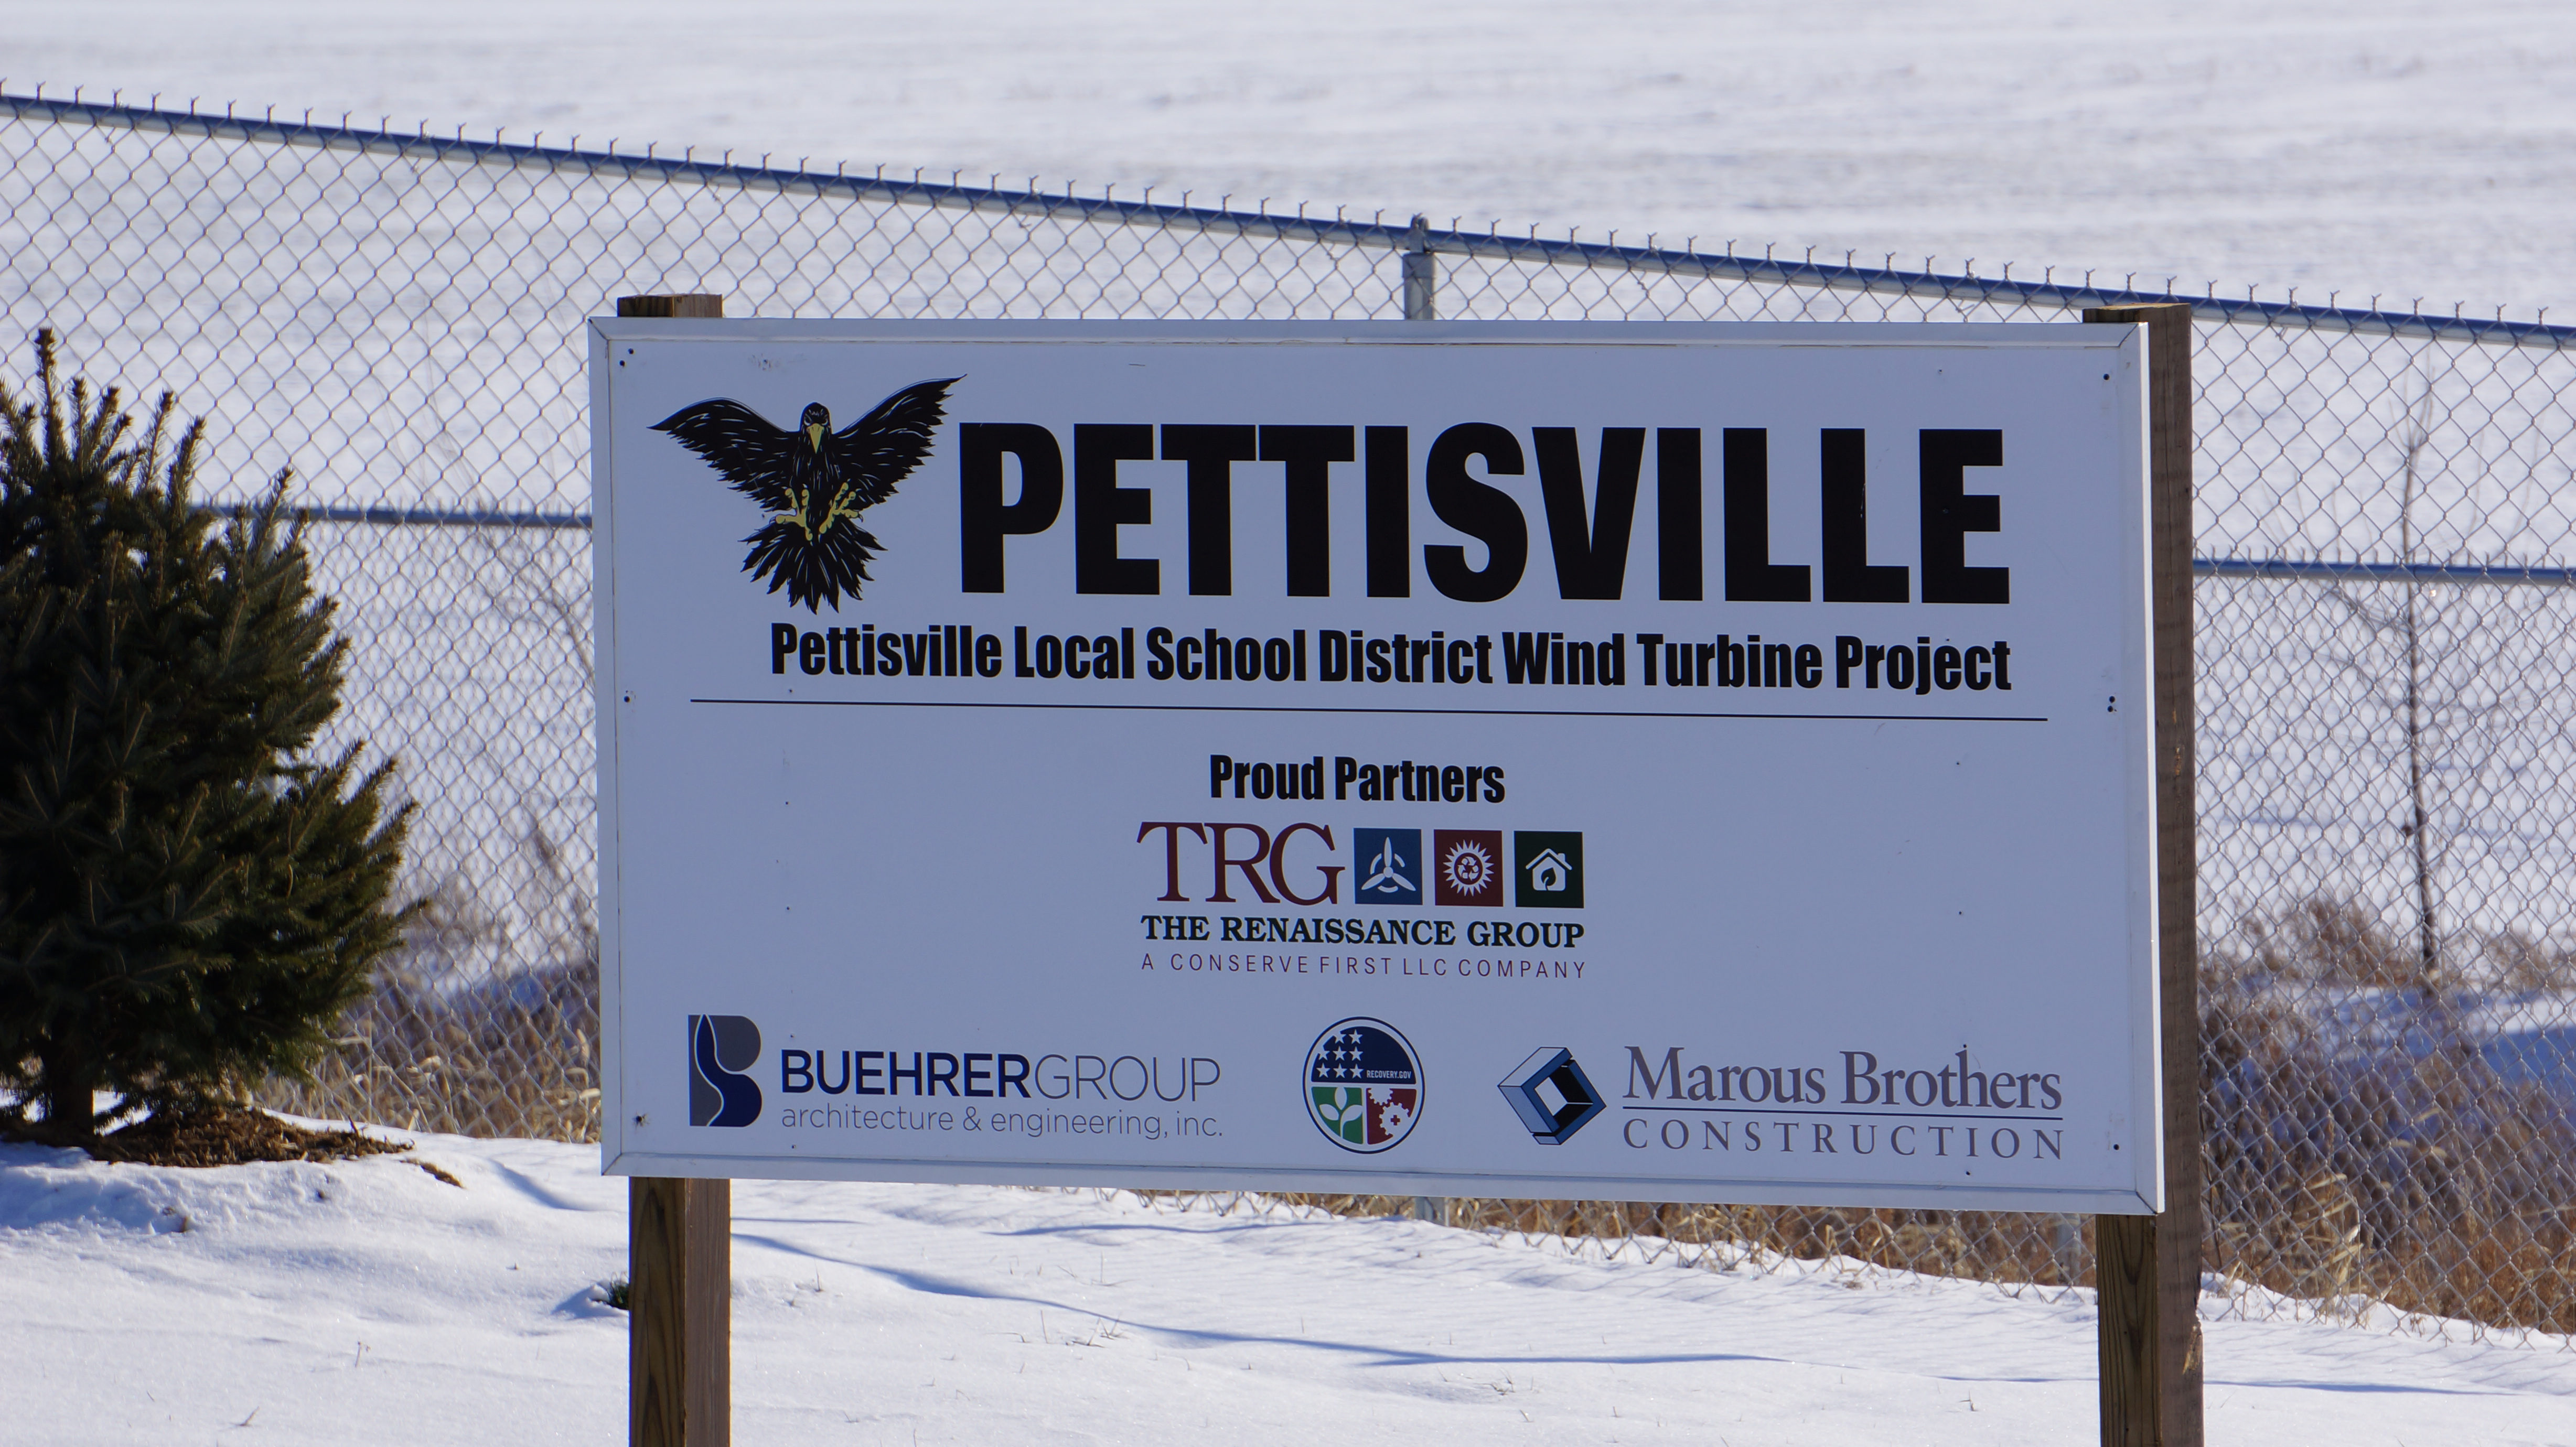 A picture of the pettisville wind turbine project sign 